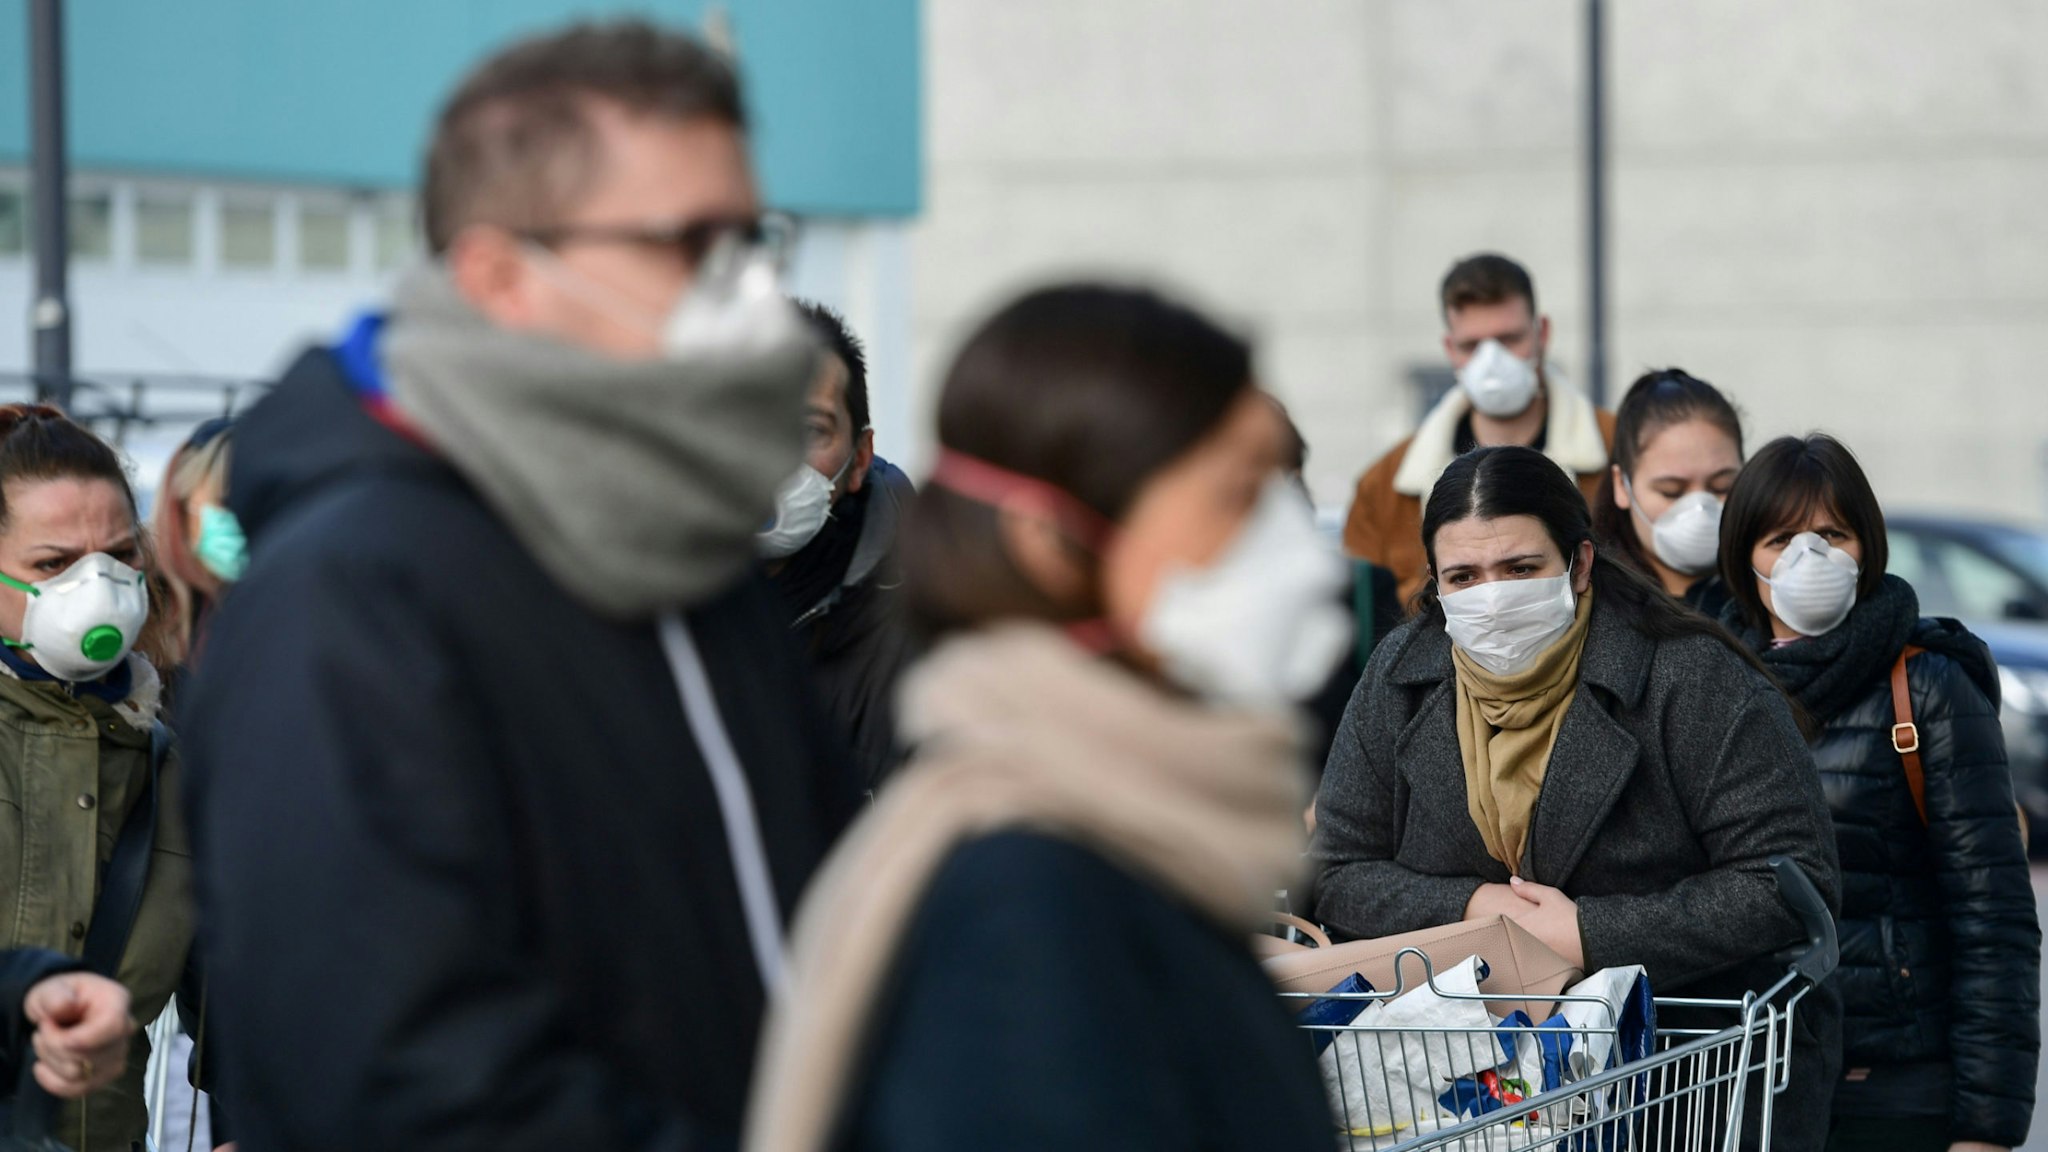 Residents wearing respiratory mask wait to be given access to shop in a supermarket in small groups of forty people on February 23, 2020 in the small Italian town of Casalpusterlengo, under the shadow of a new coronavirus outbreak, as Italy took drastic containment steps as worldwide fears over the epidemic spiralled.